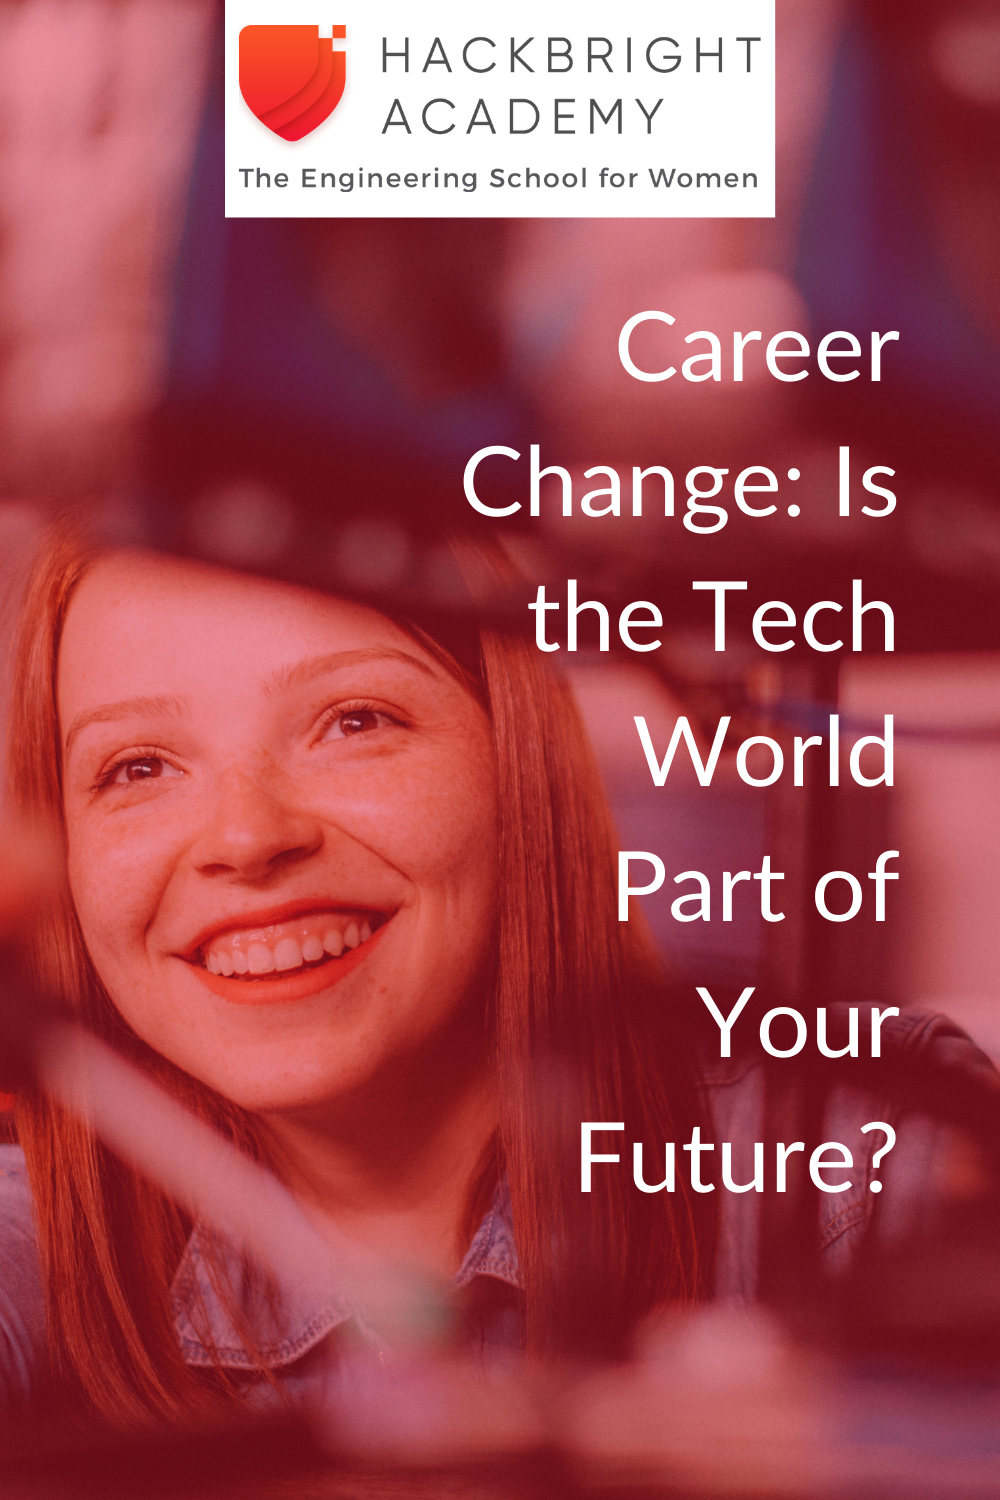 Career Change: Is the Tech World Part of Your Future?